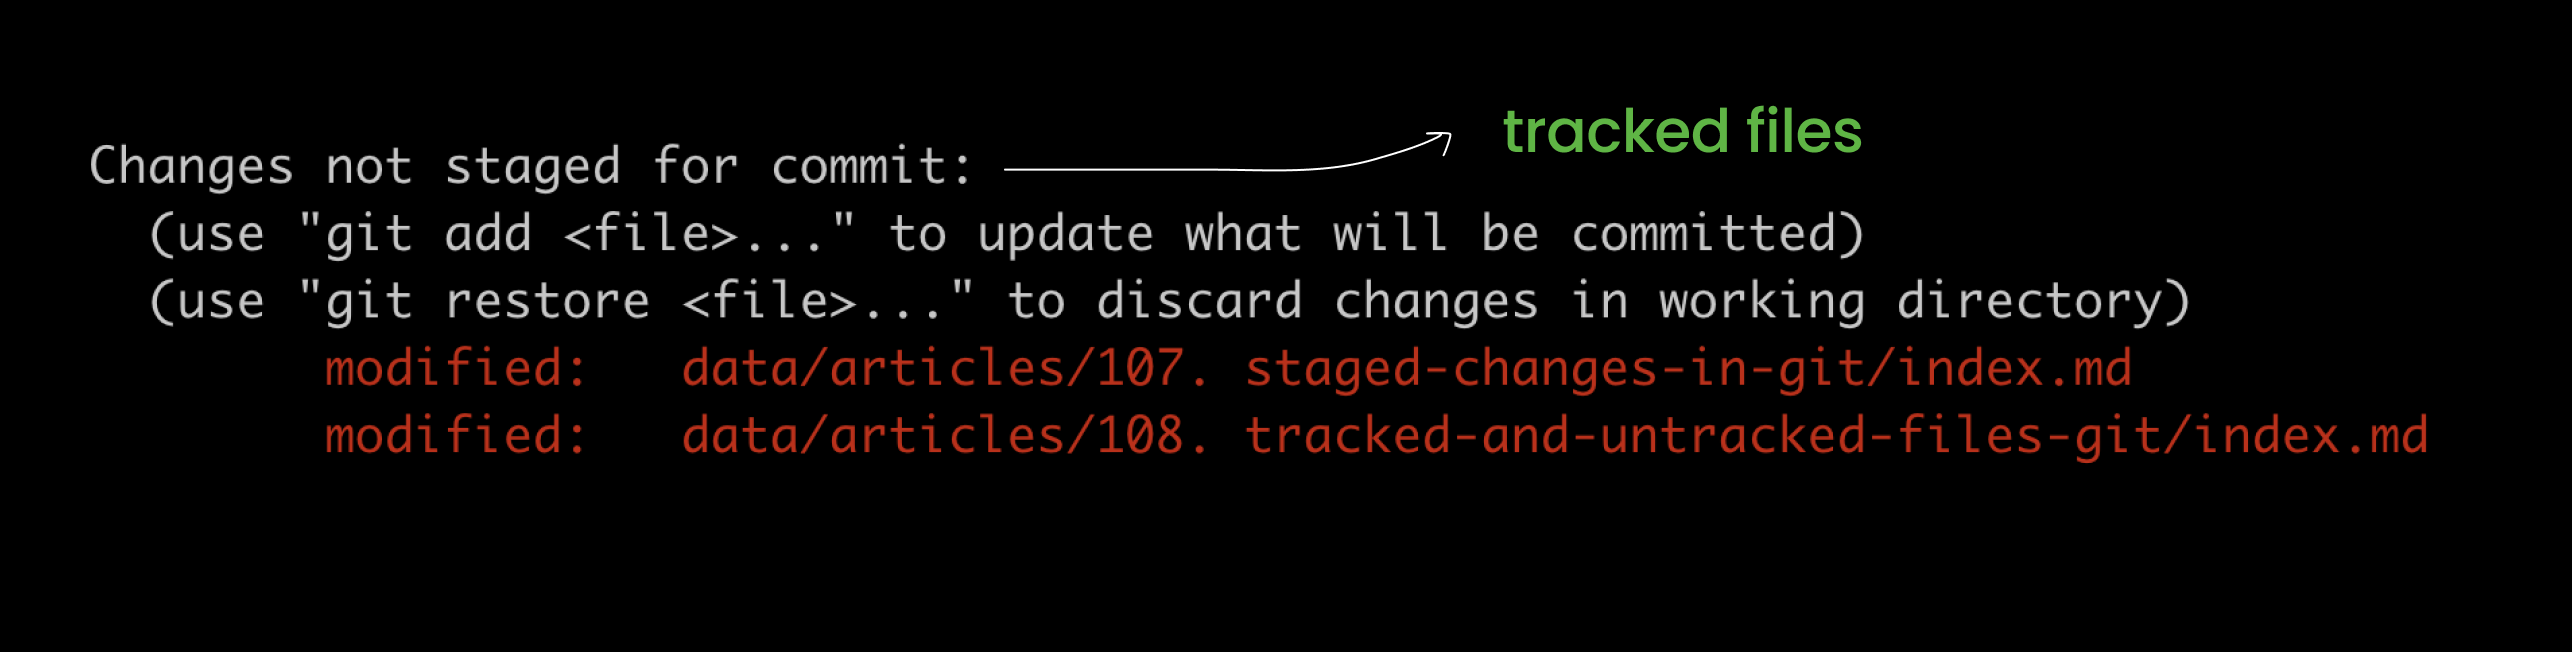 Git status showing only tracked files